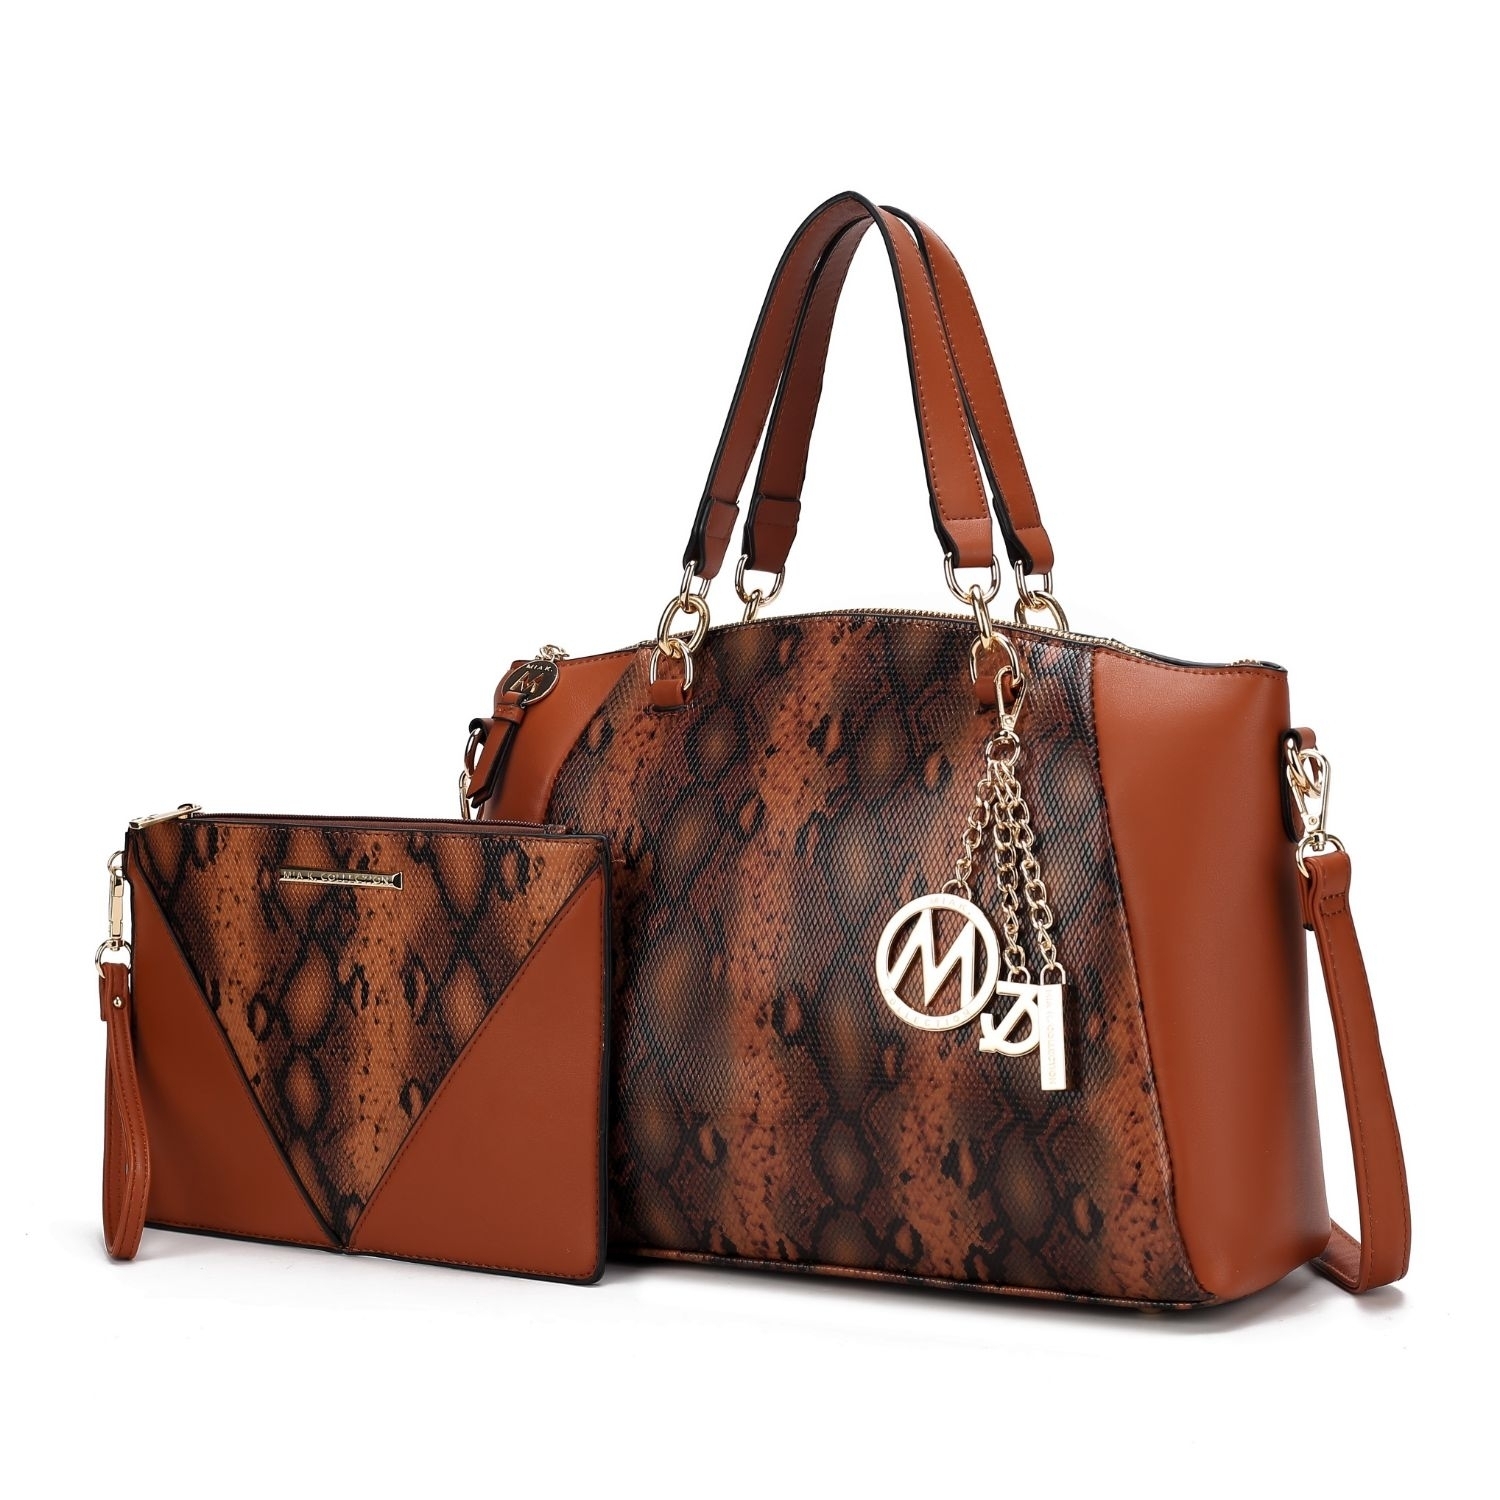 MKF Collection Addison Snake Embossed Vegan Leather Women's Tote Bag With Matching Wristlet By Mia K- 2 Pieces - Cognac